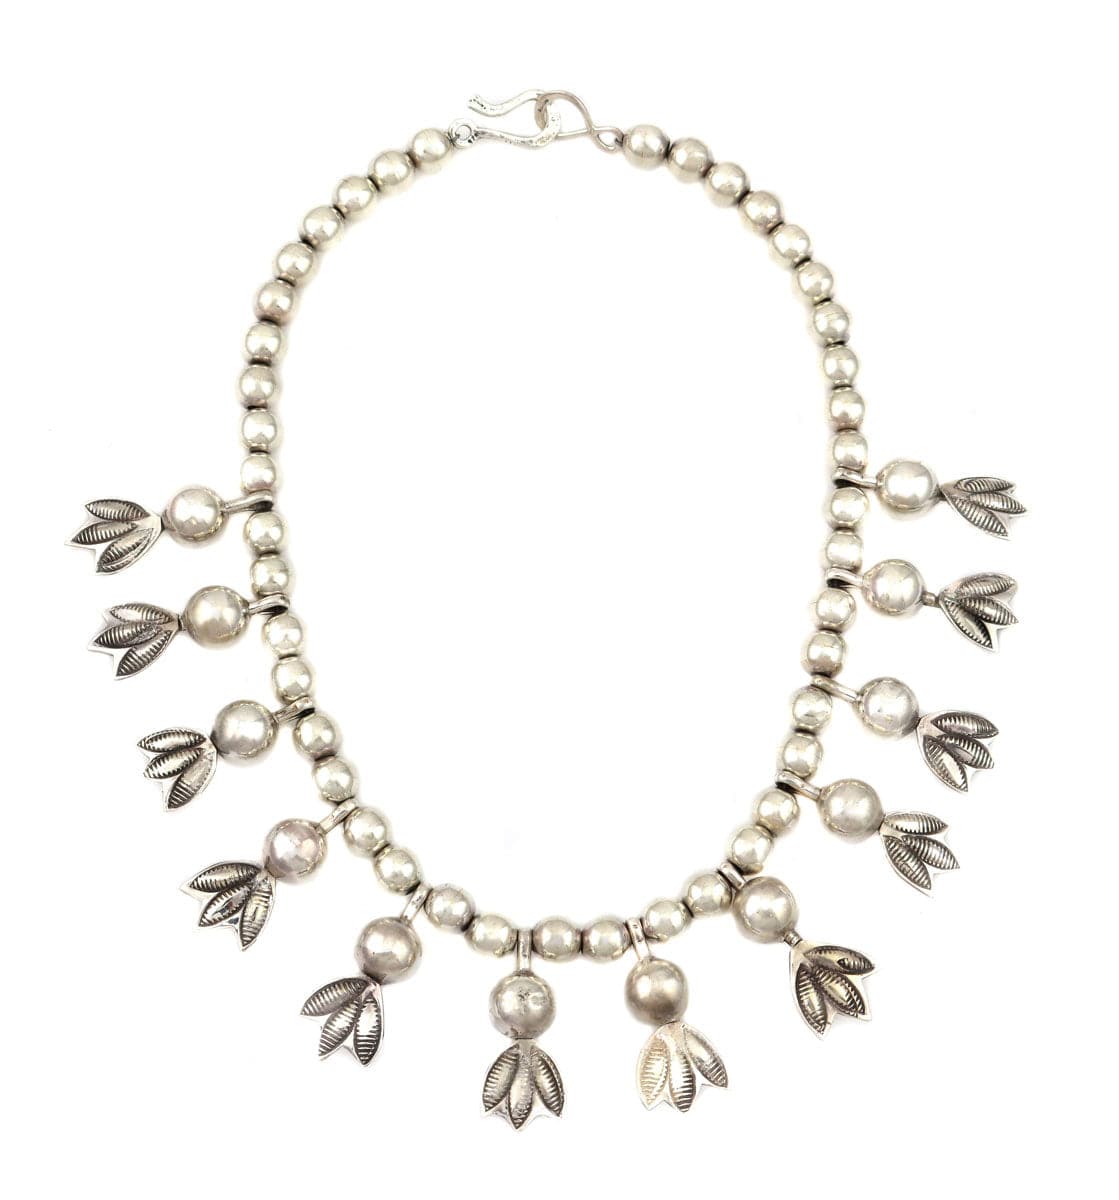 Miramontes - Silver Beaded Necklace with "Anniversary" Blossoms, 17" Length (J91305-1221-030)